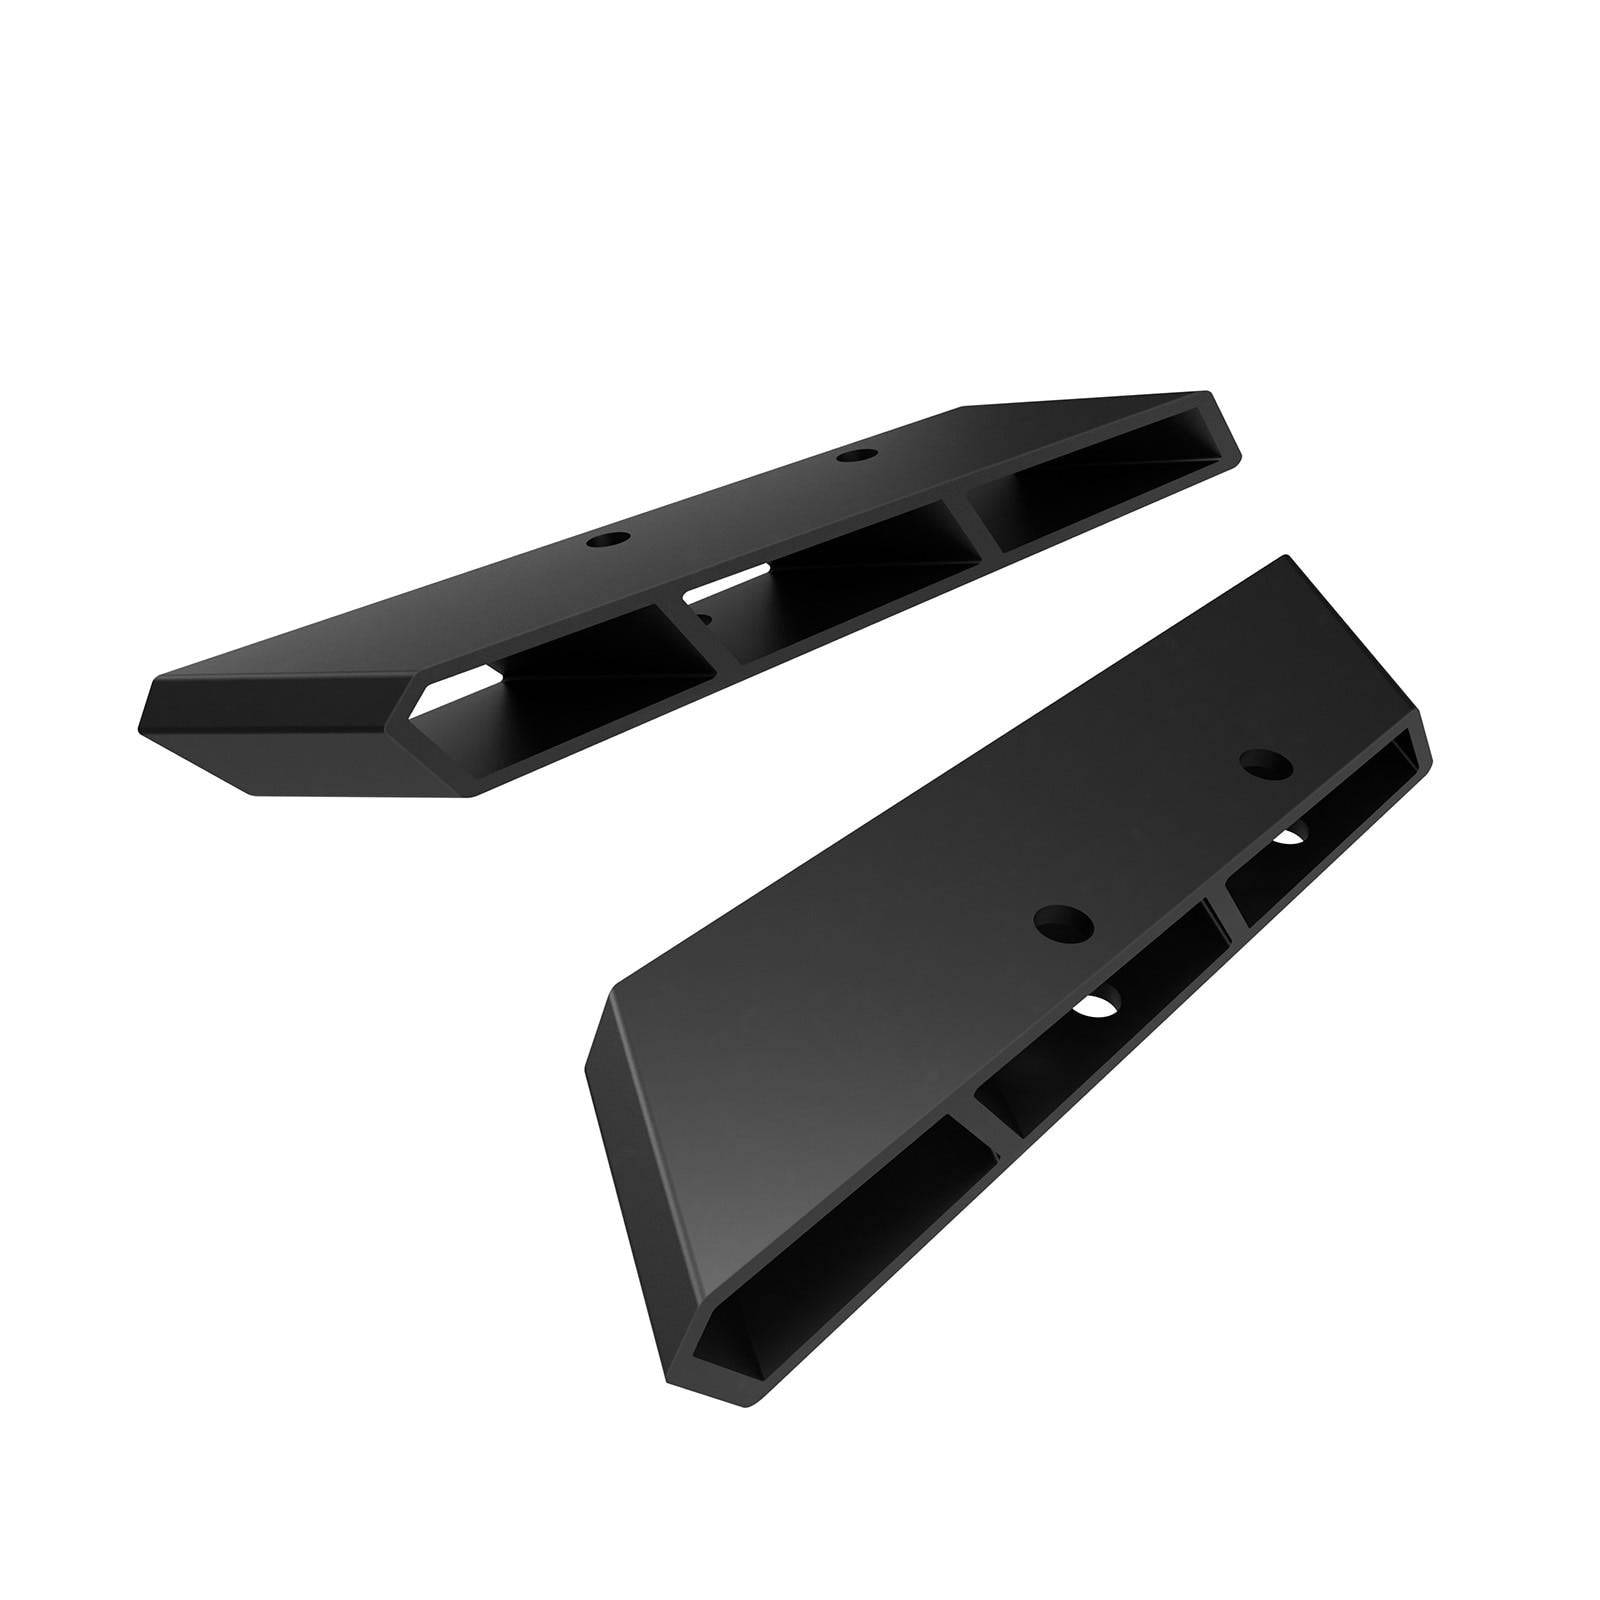 Ski-Doo Shims for LinQ Accessories